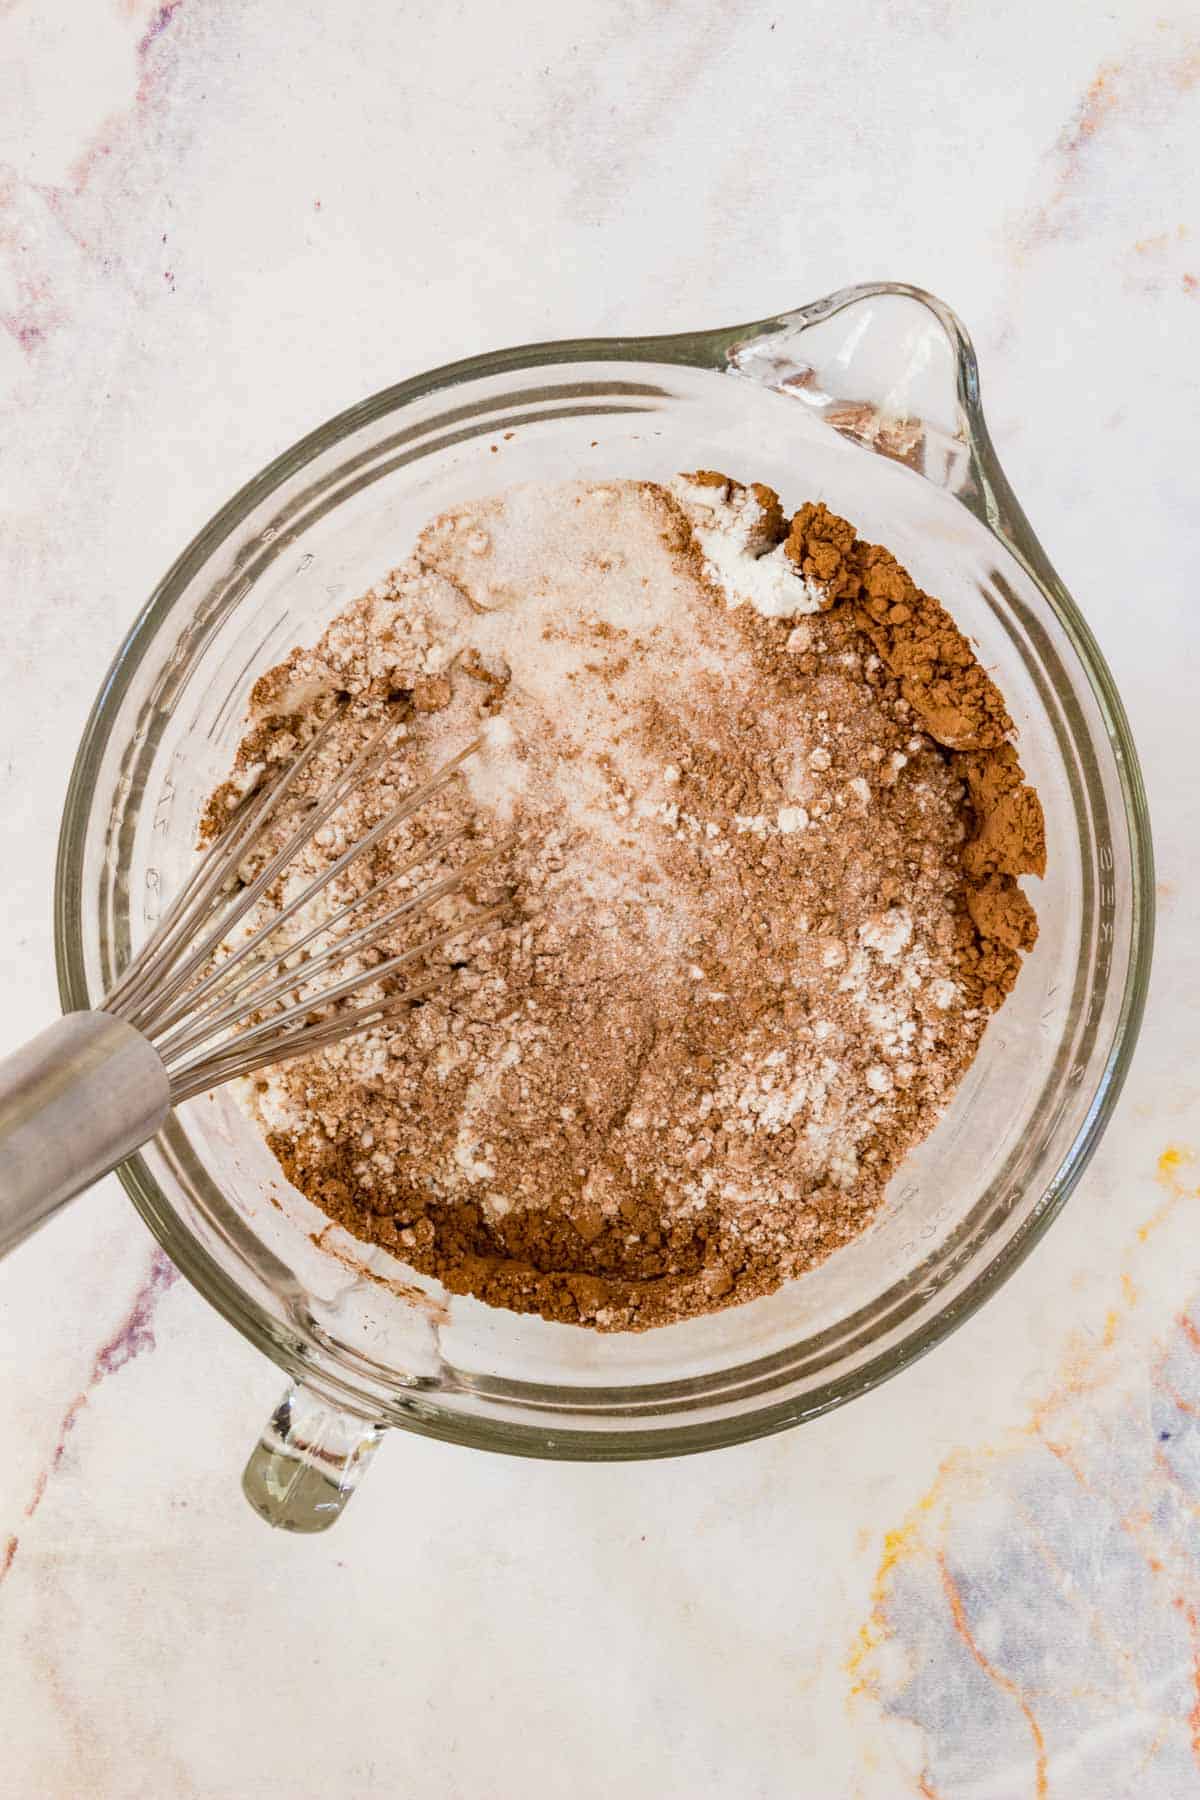 The cake ingredients are combined in a glass mixing bowl.